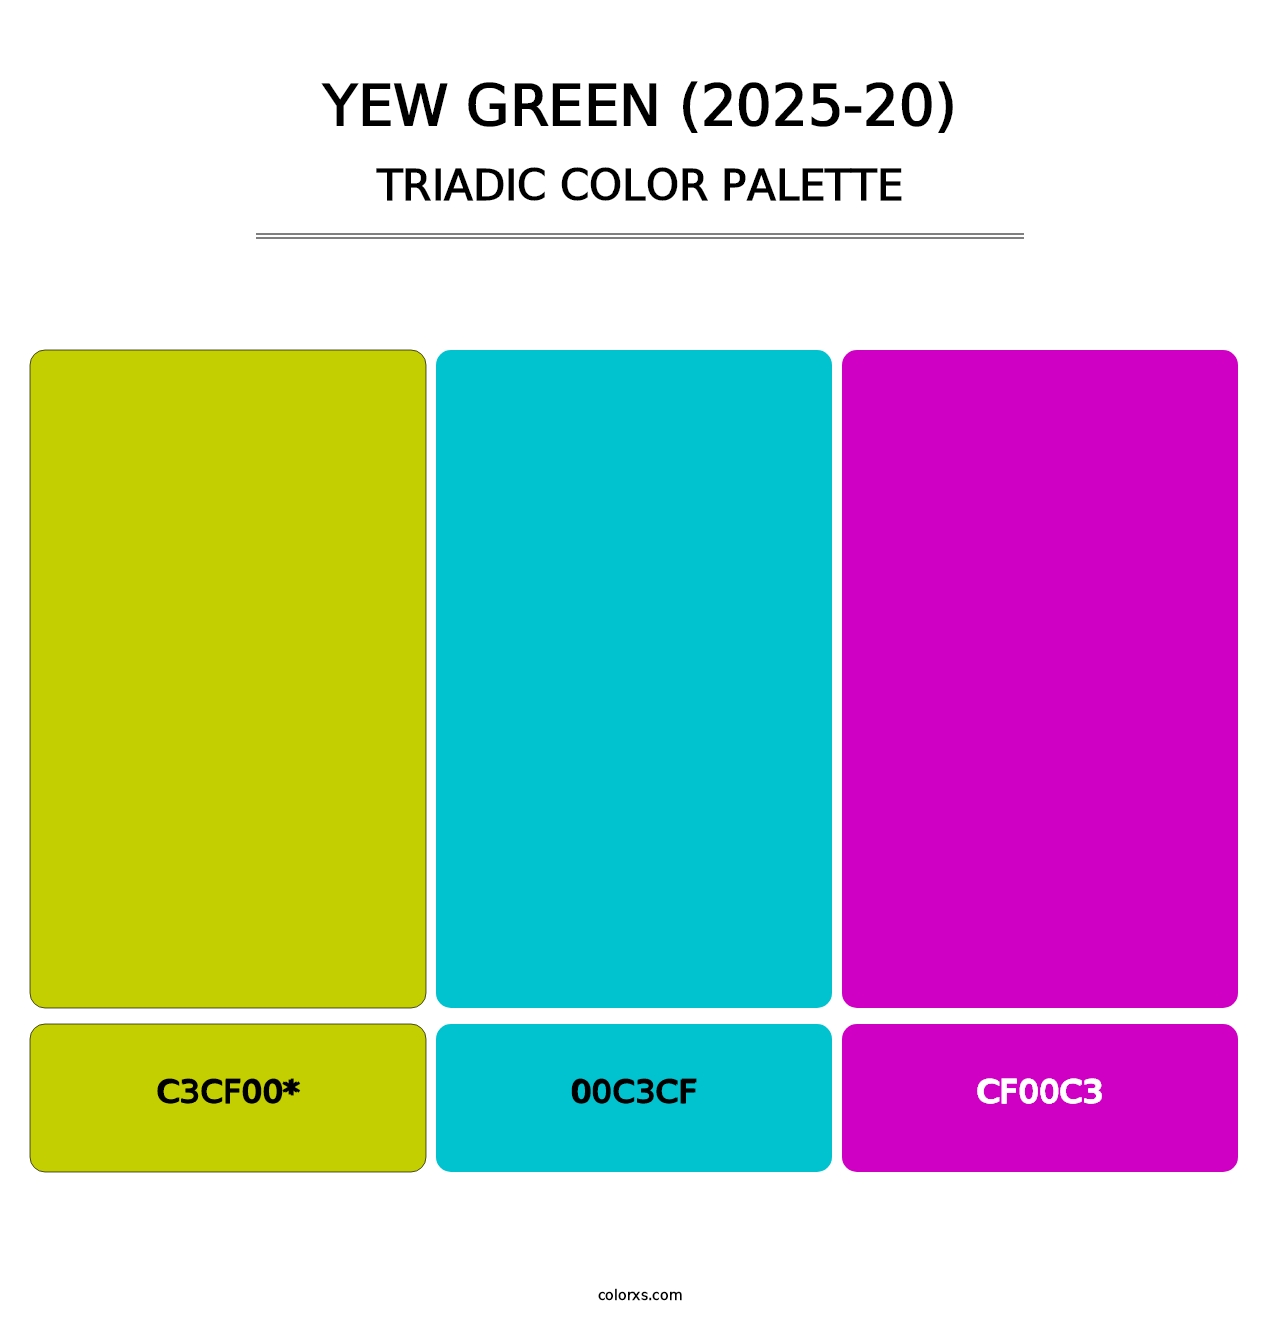 Yew Green (2025-20) - Triadic Color Palette